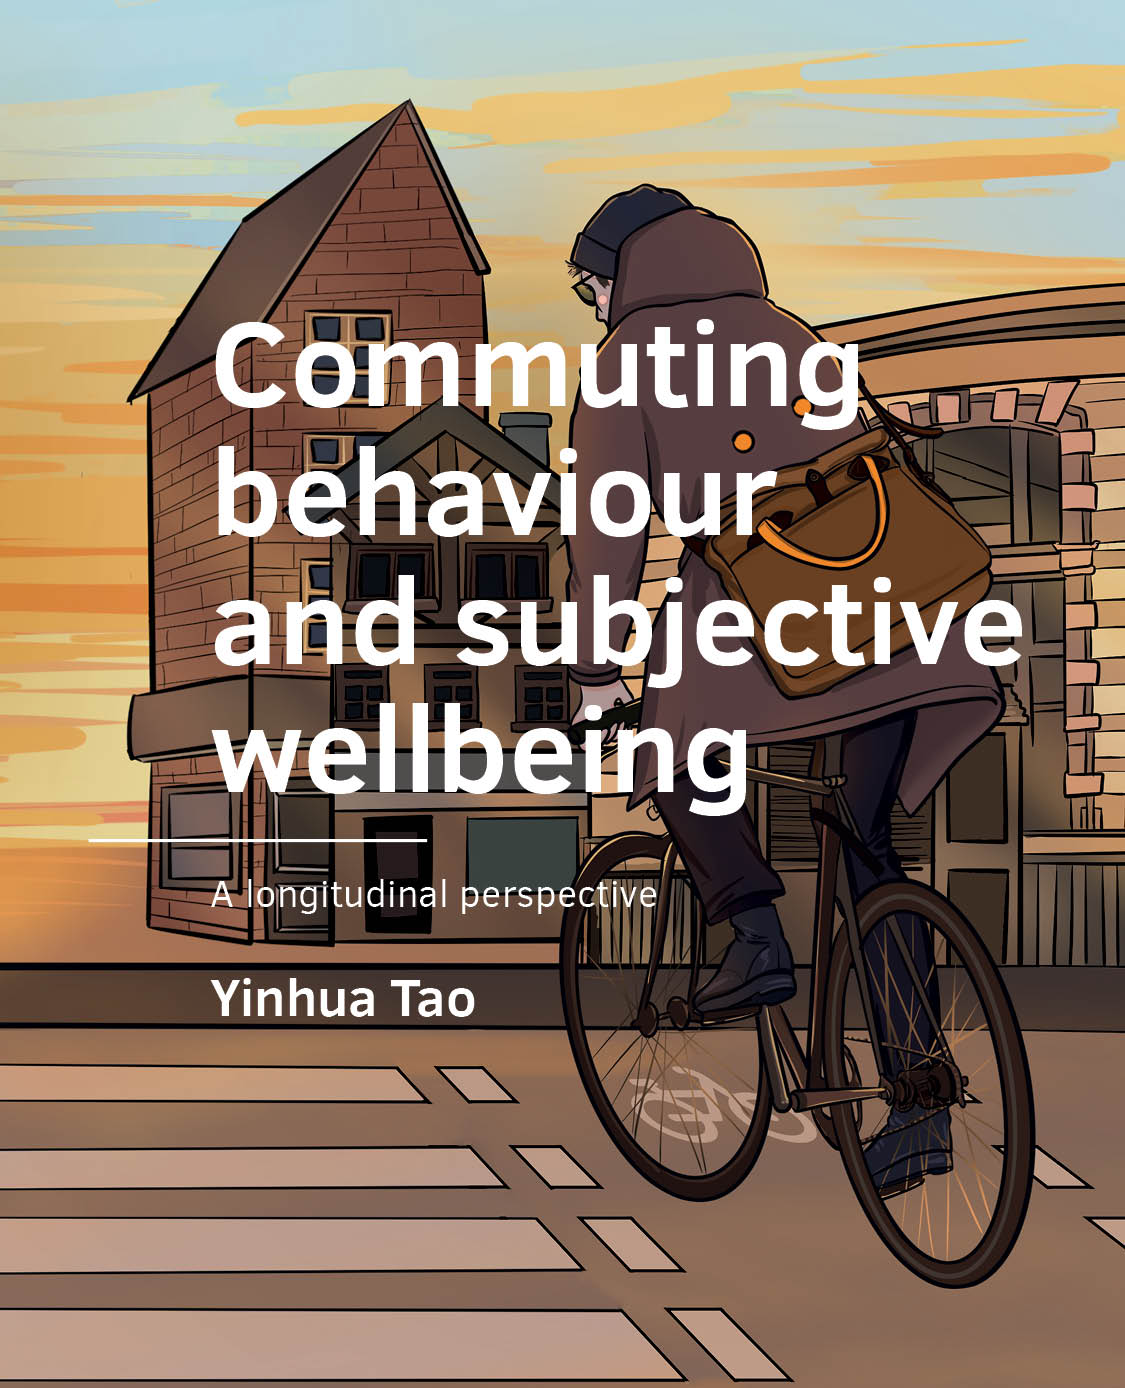 					View No. 07 (2023): Commuting behaviour and subjective wellbeing
				